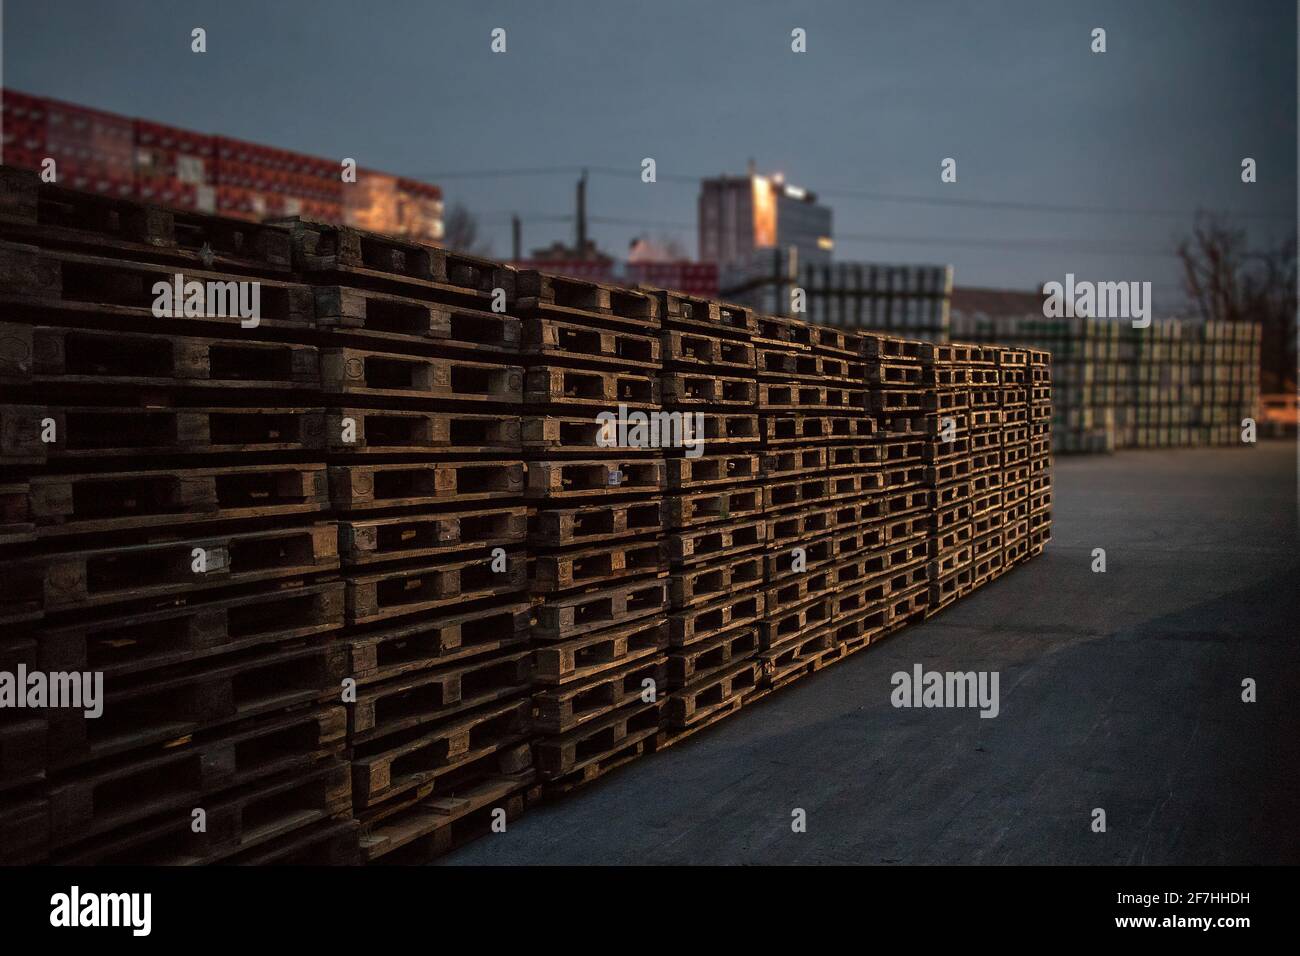 A row or stack of wooden euro palettes in early foggy morning. Used euro palettes waiting in an open space warehouse during early morning hours. Stock Photo